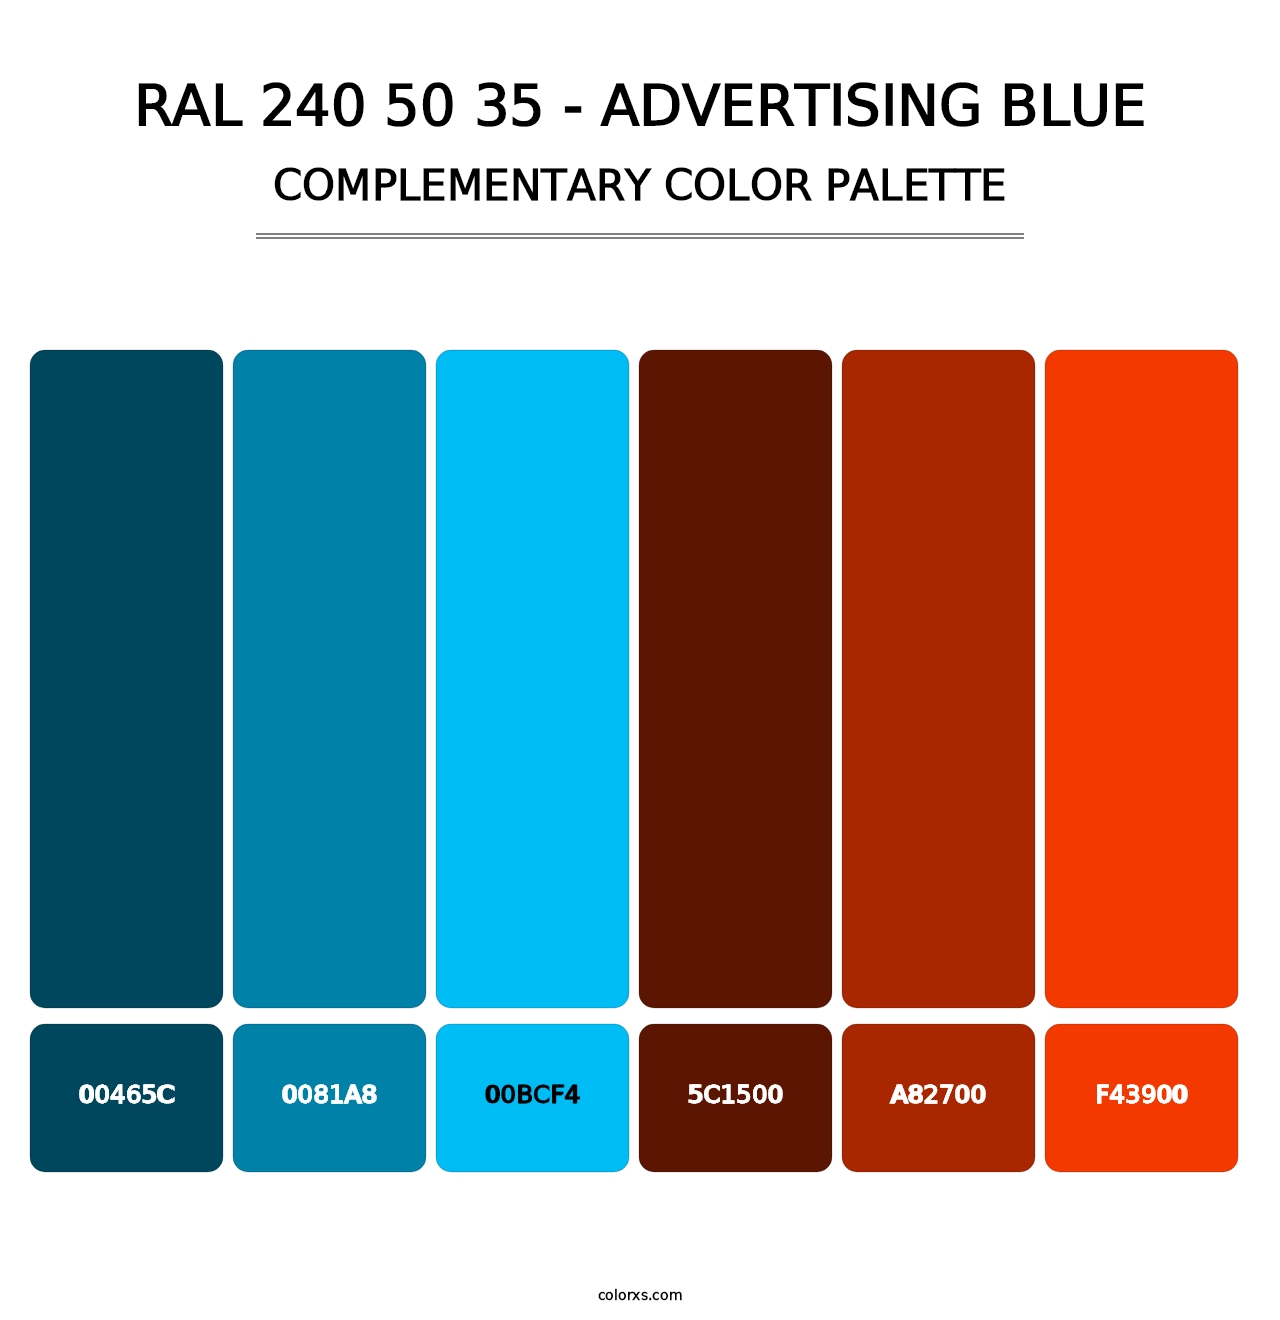 RAL 240 50 35 - Advertising Blue - Complementary Color Palette